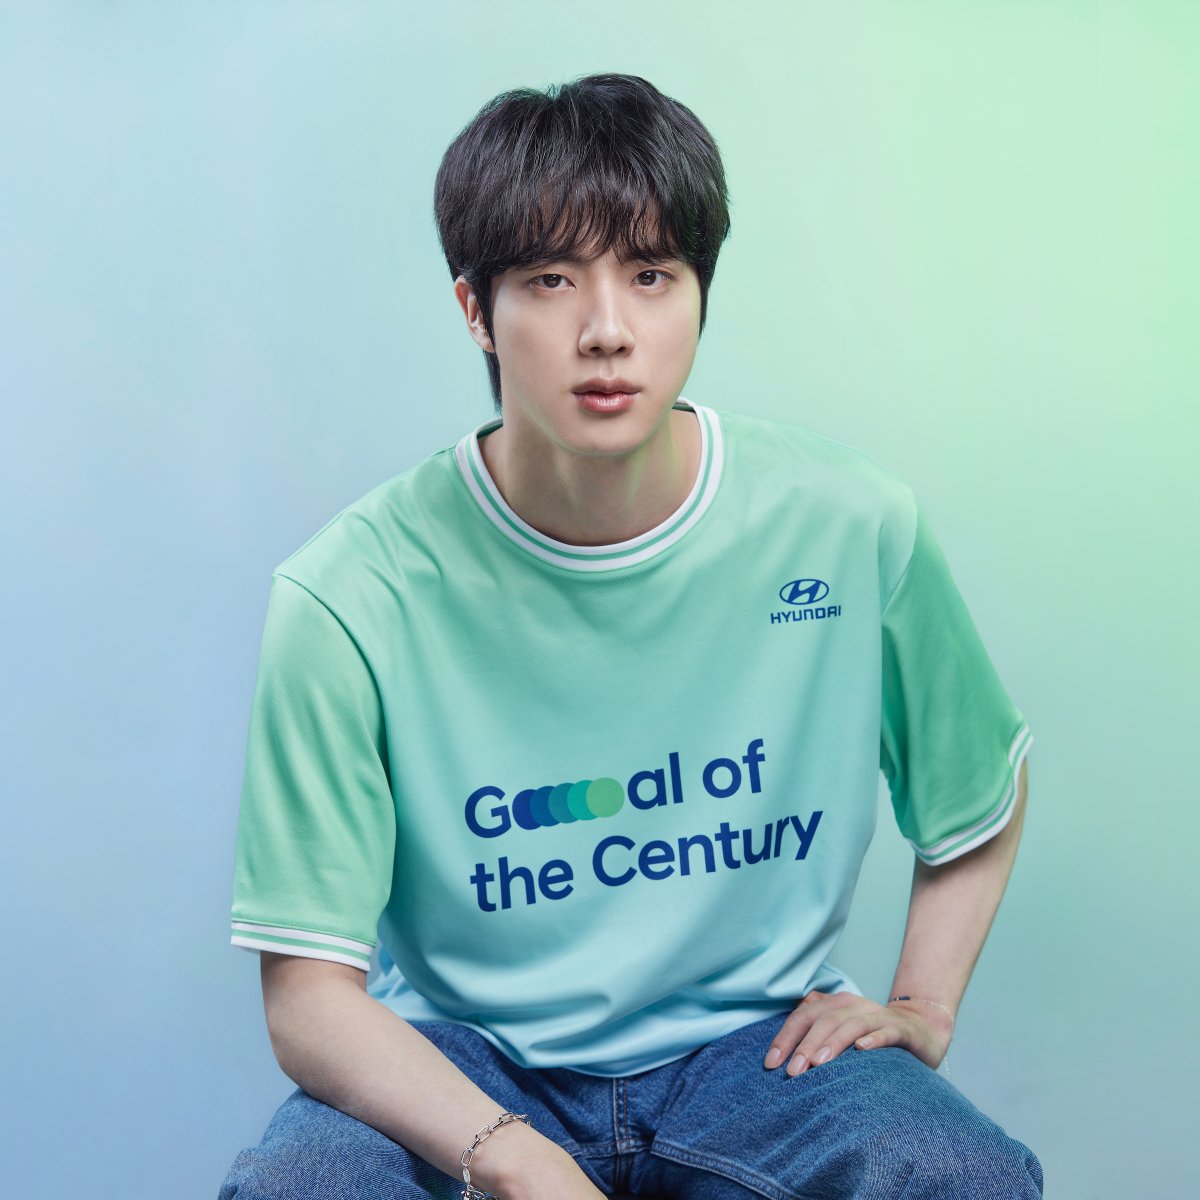 “A sustainable world can only be achieved by solidarity. That's the Goal of the Century.” Jin shared his point of view of the #GoaloftheCentury.

Subscribe to our newsletter to join us and get an exclusive BTS photo in your mail: bit.ly/3LJxUUv

#HyundaixBTS @bts_bighit